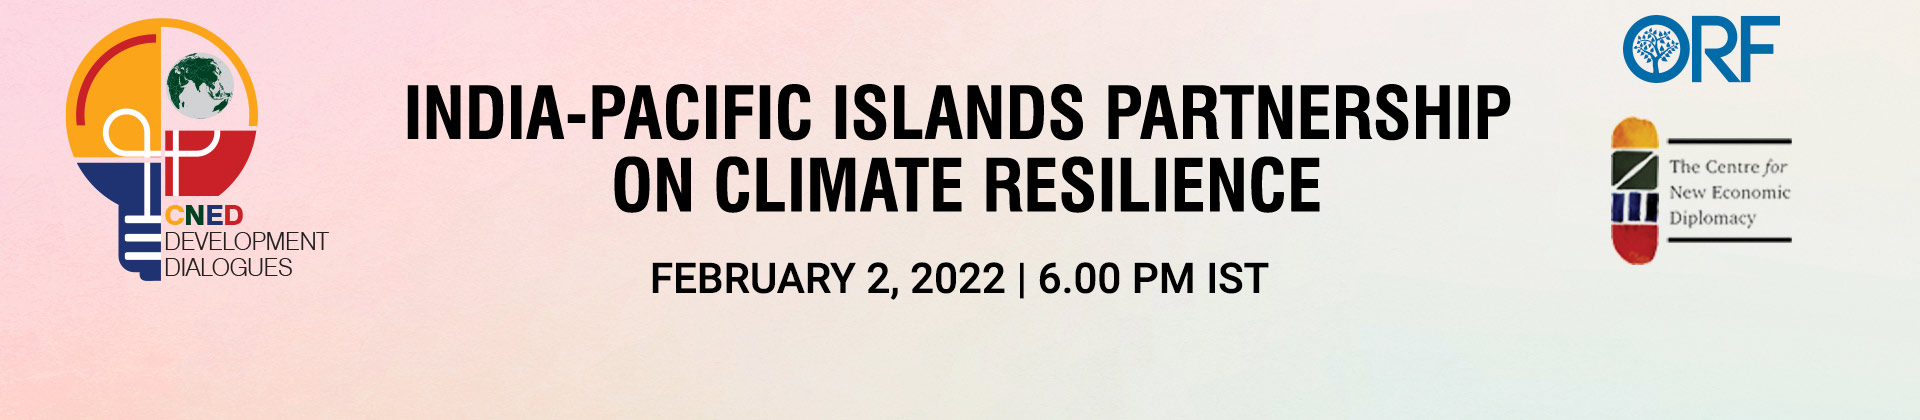 India and Pacific Islands Partnership on Climate Resilience | CNED Development Dialogues